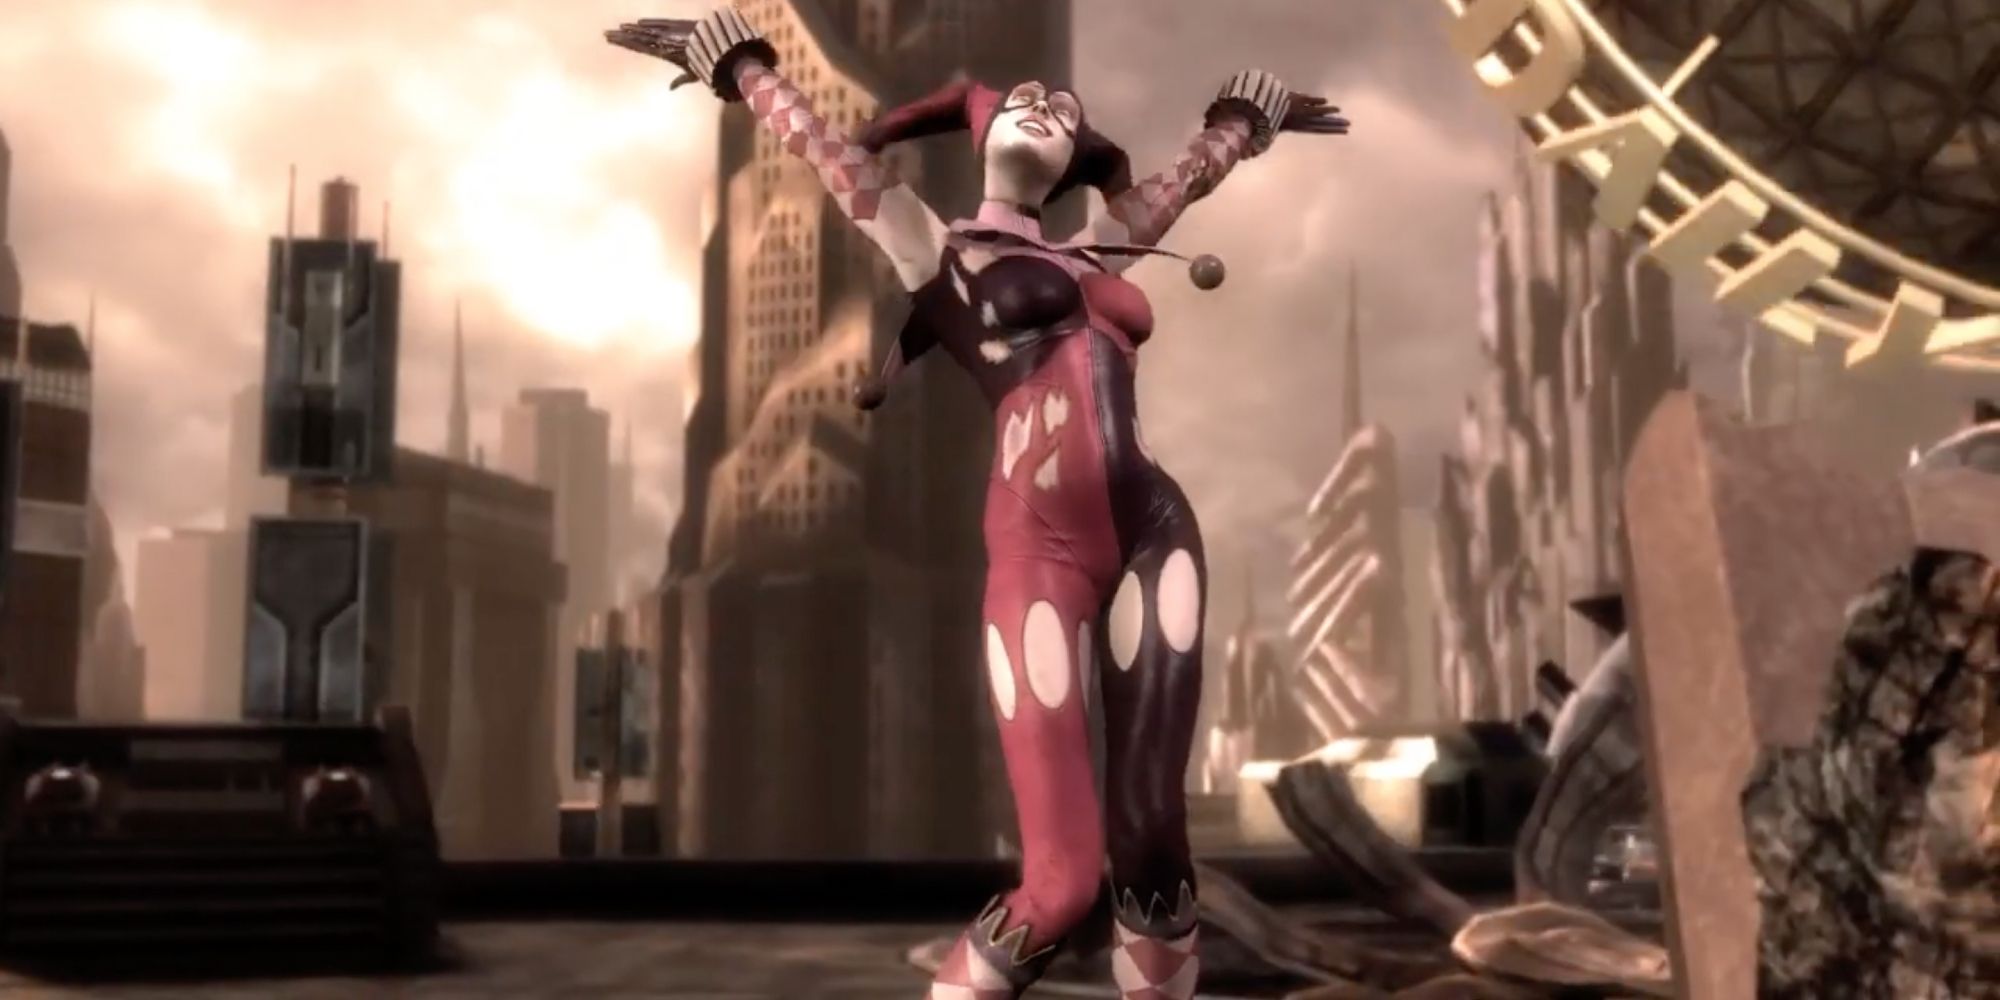 Iconic Fighting Stances in Video Games - Harley Quinn - Player defeats opponent without a sweat